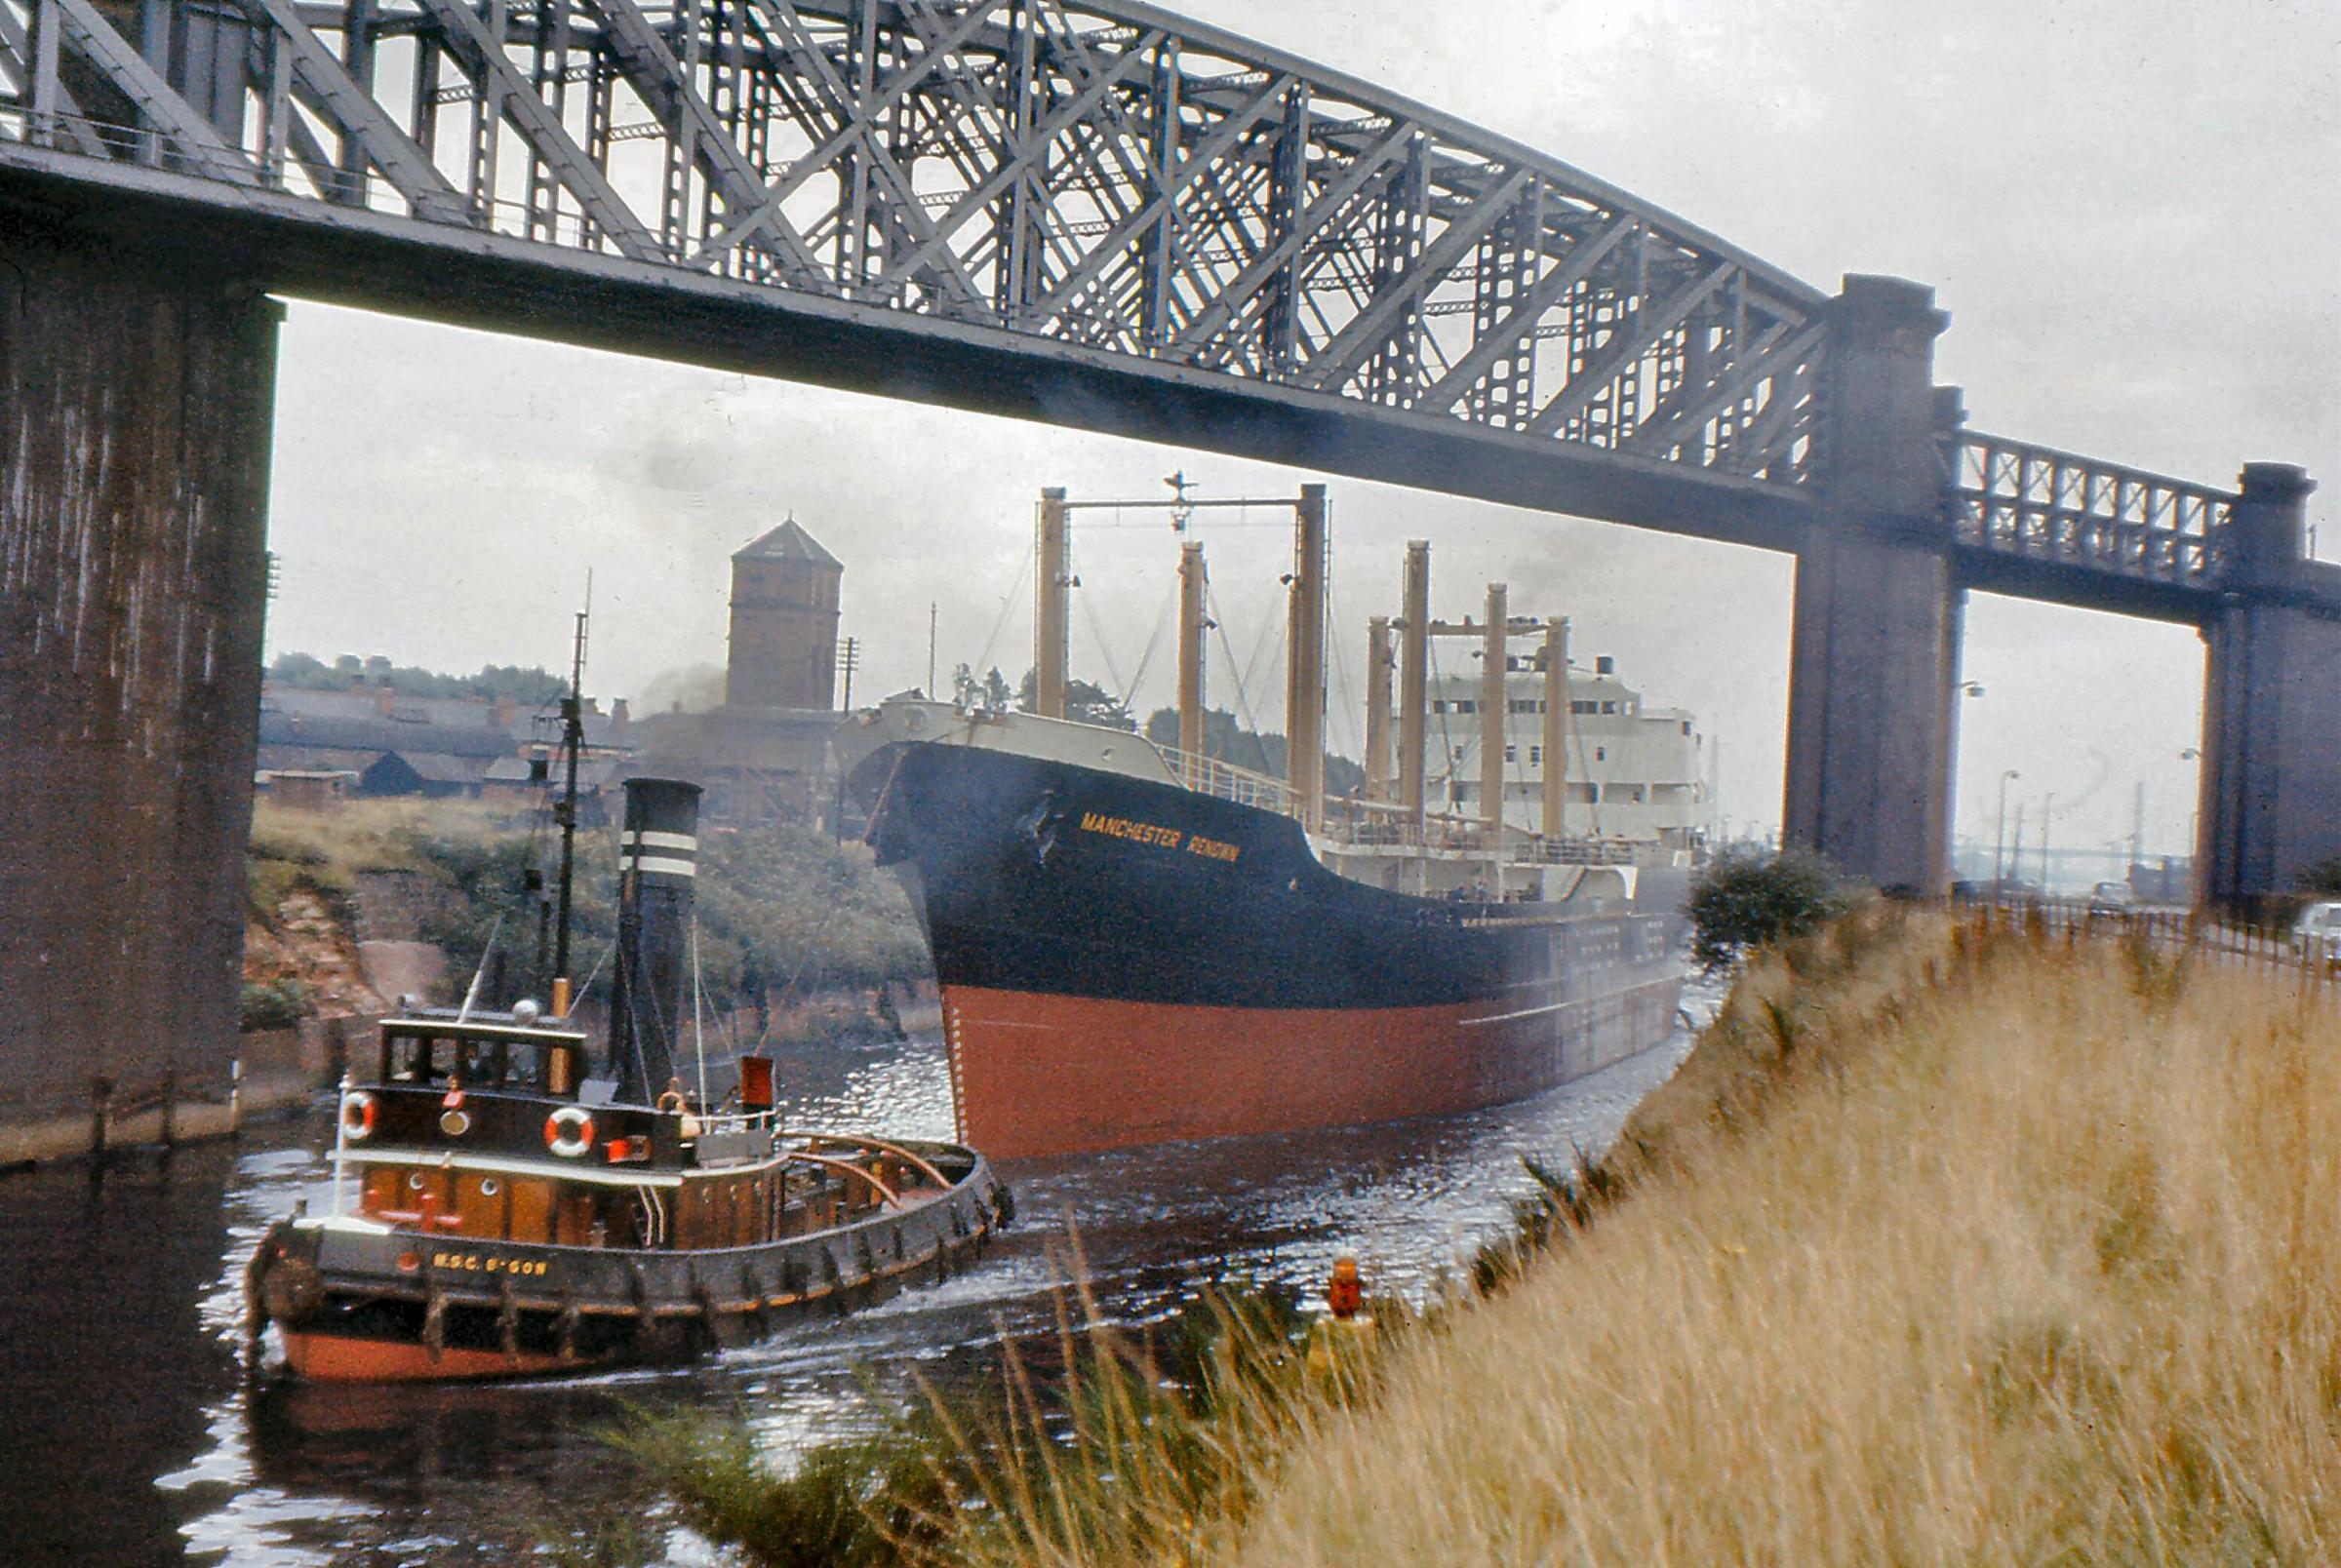 A ship passes under the railway viaduct in September 1965 (Image: Eddie Whitham)